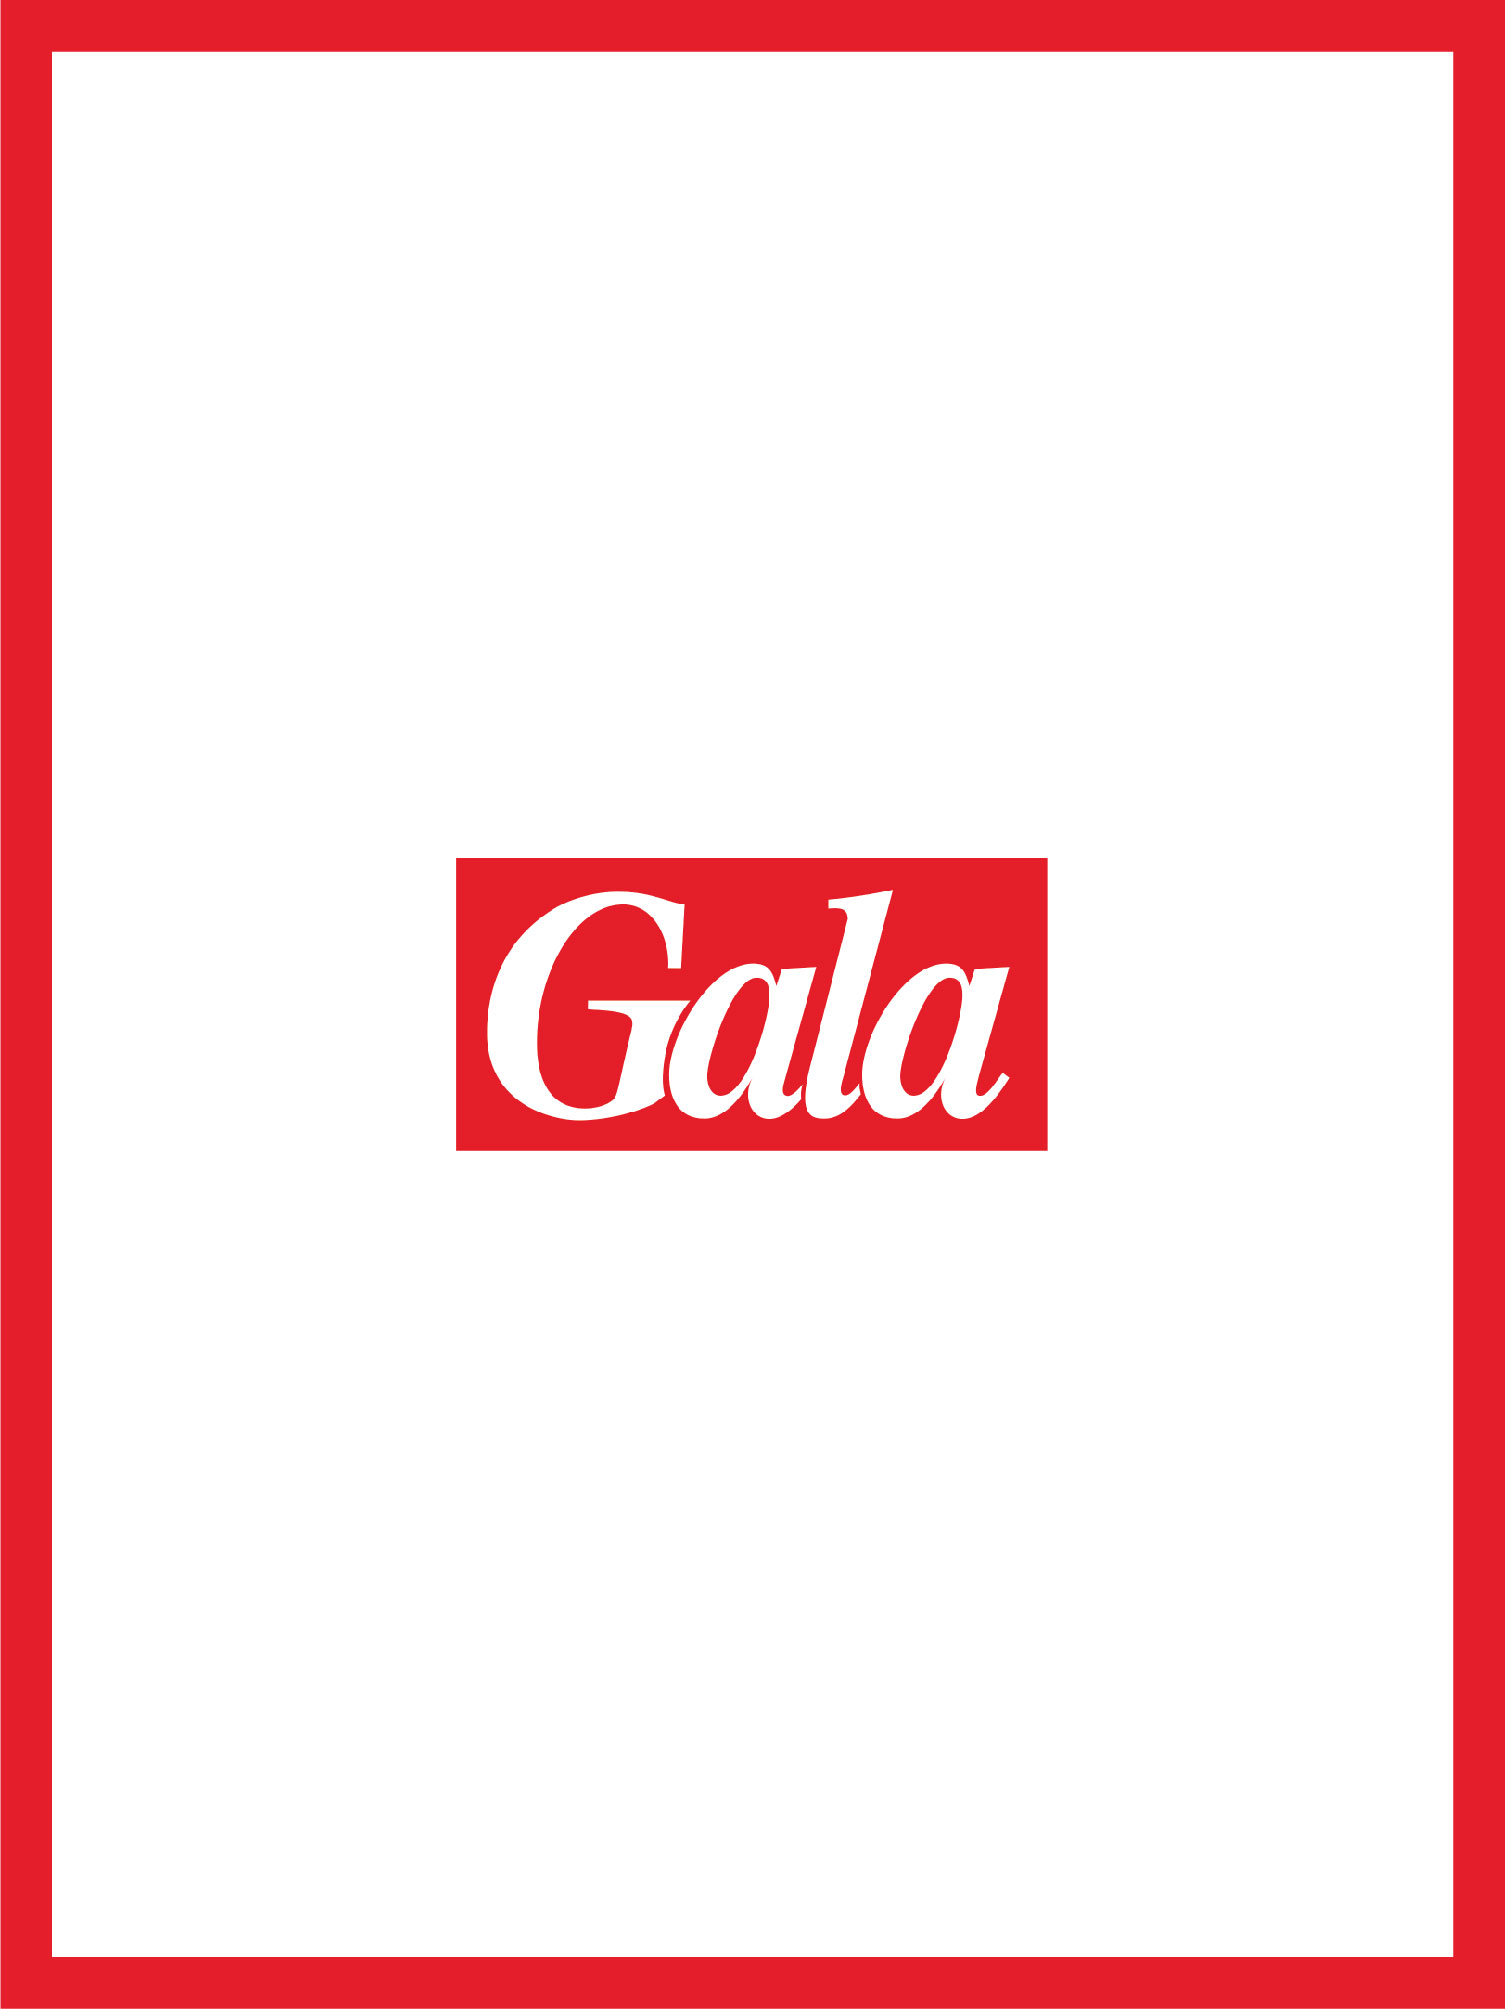 cover and logo gala